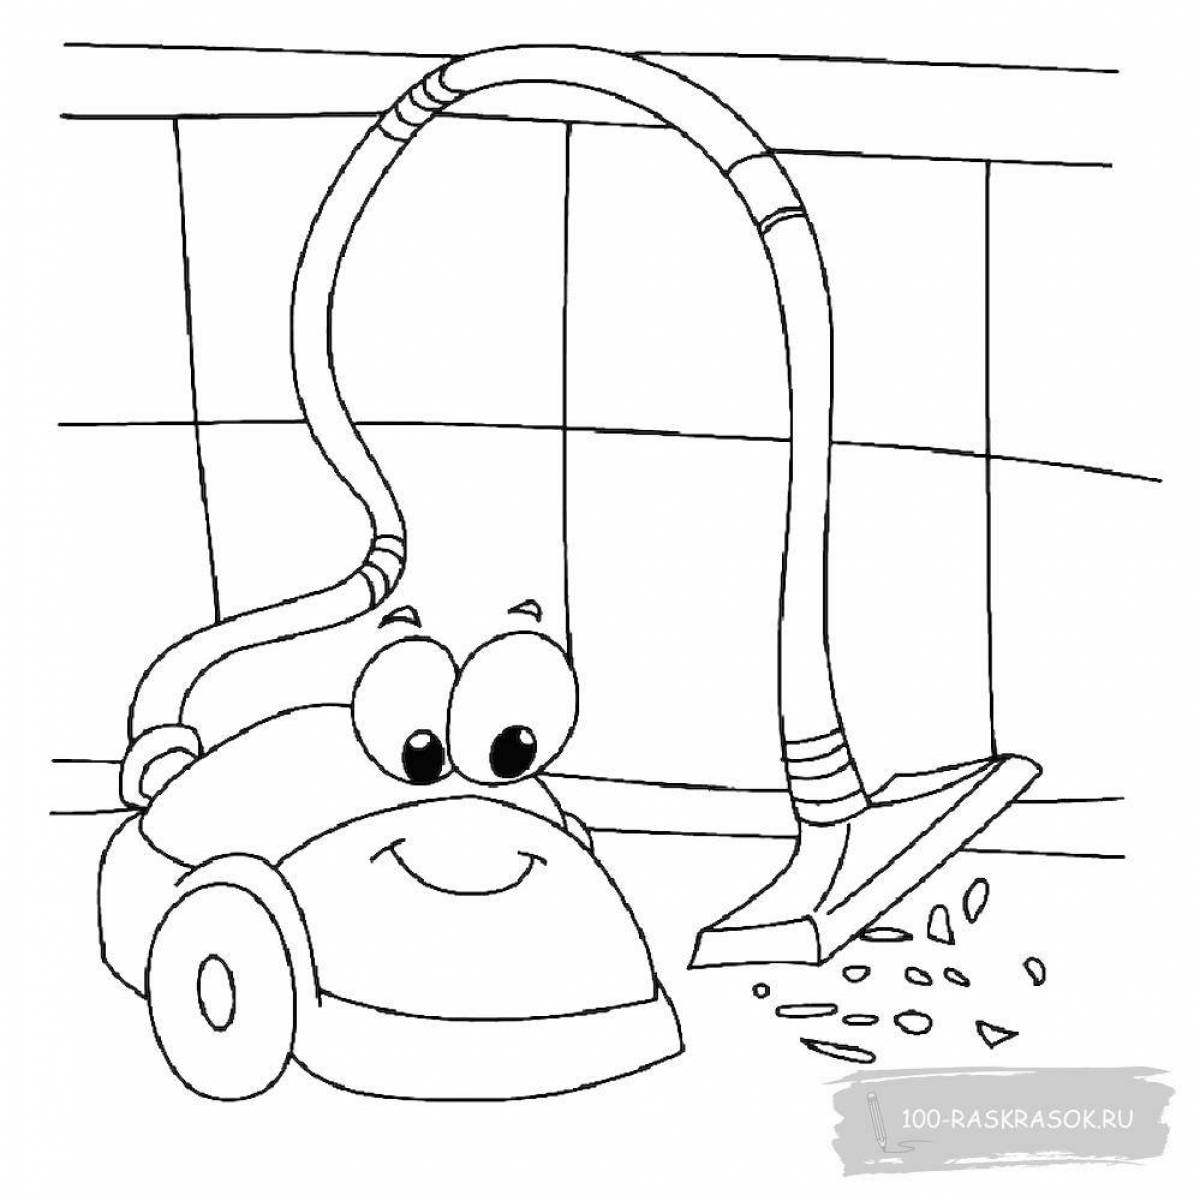 Charming robot vacuum cleaner coloring book